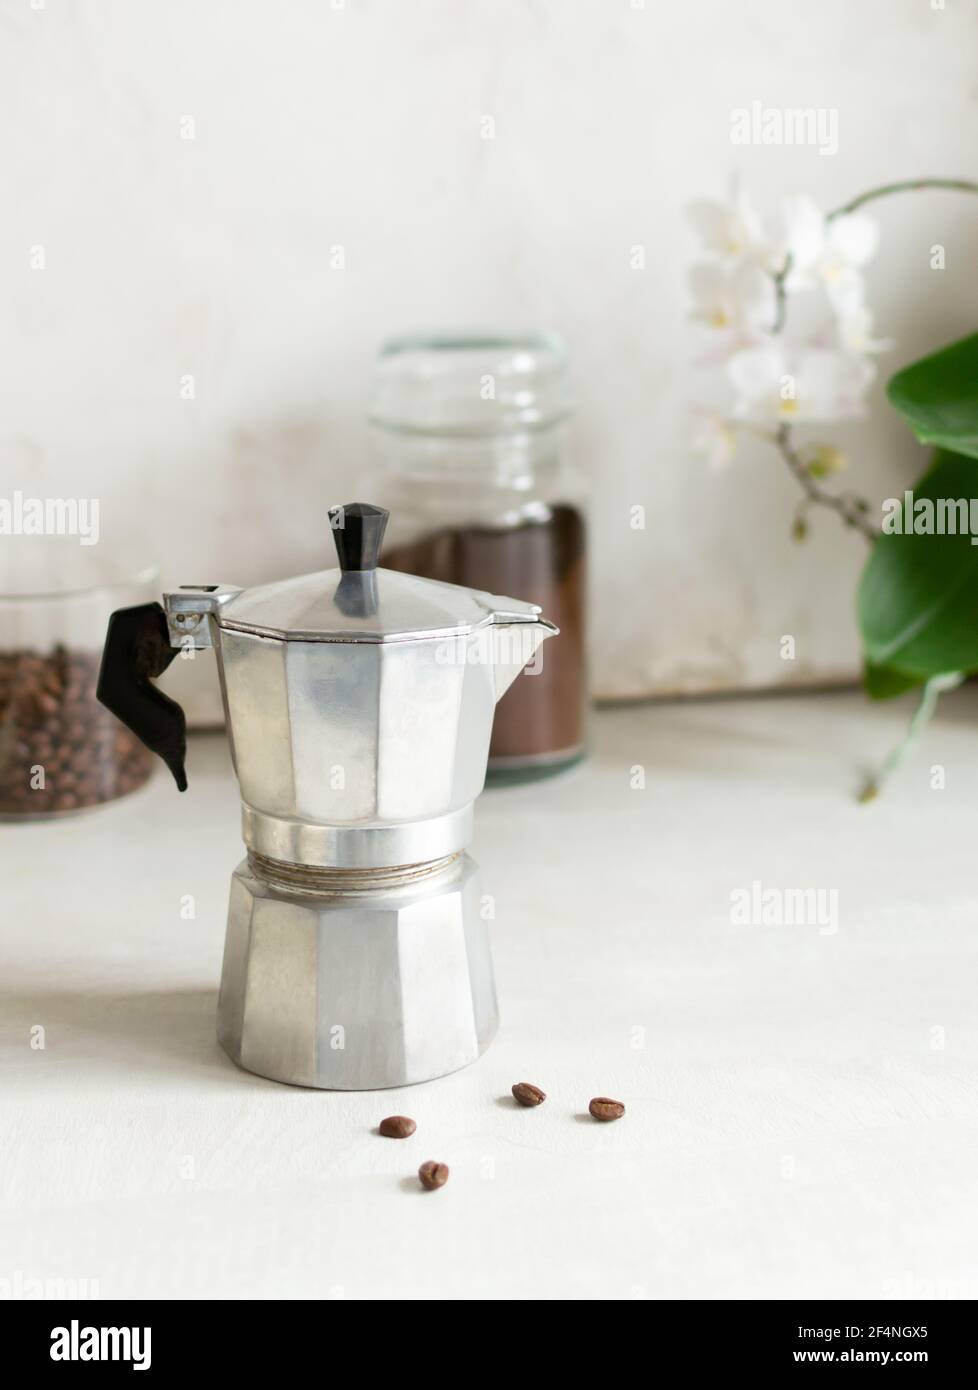 https://c8.alamy.com/comp/2F4NGX5/the-concept-of-making-coffee-in-a-home-kitchen-the-geyser-coffee-maker-is-on-the-table-next-to-the-coffee-cans-vertical-orientation-copy-space-2F4NGX5.jpg